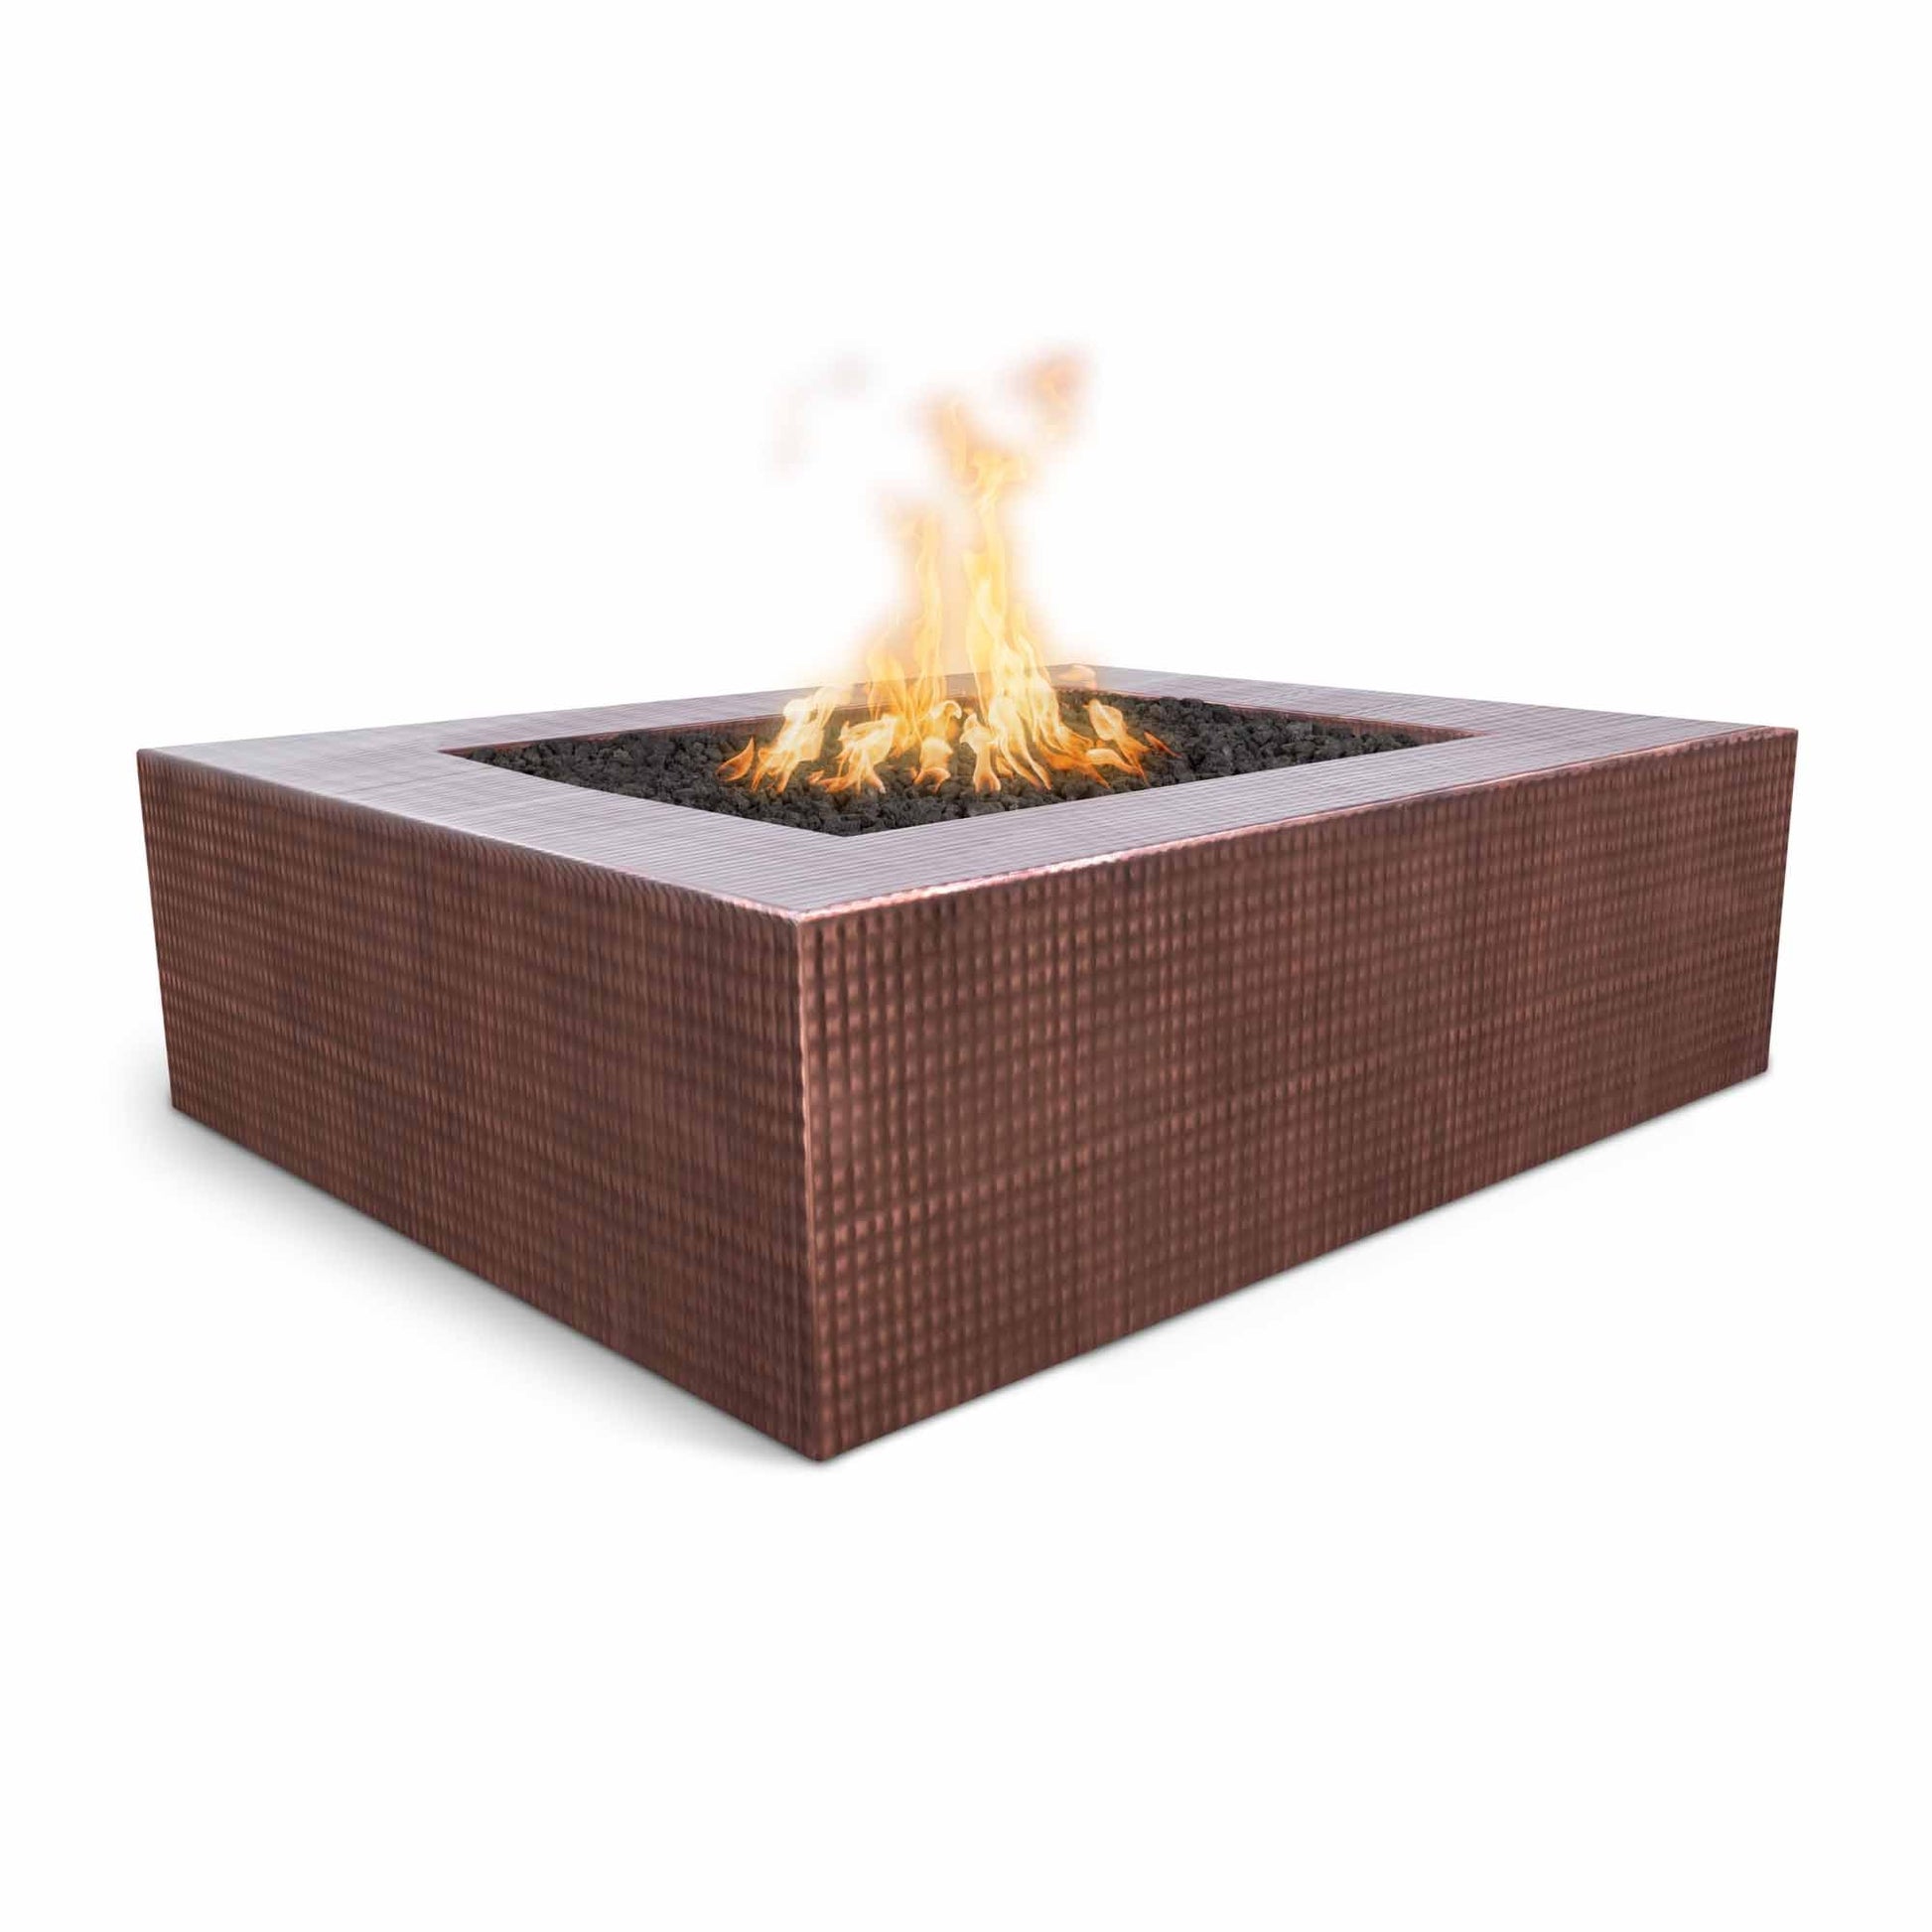 The Outdoor Plus Square Quad 42" Hammered Copper Liquid Propane Fire Pit with 110V Electronic Ignition